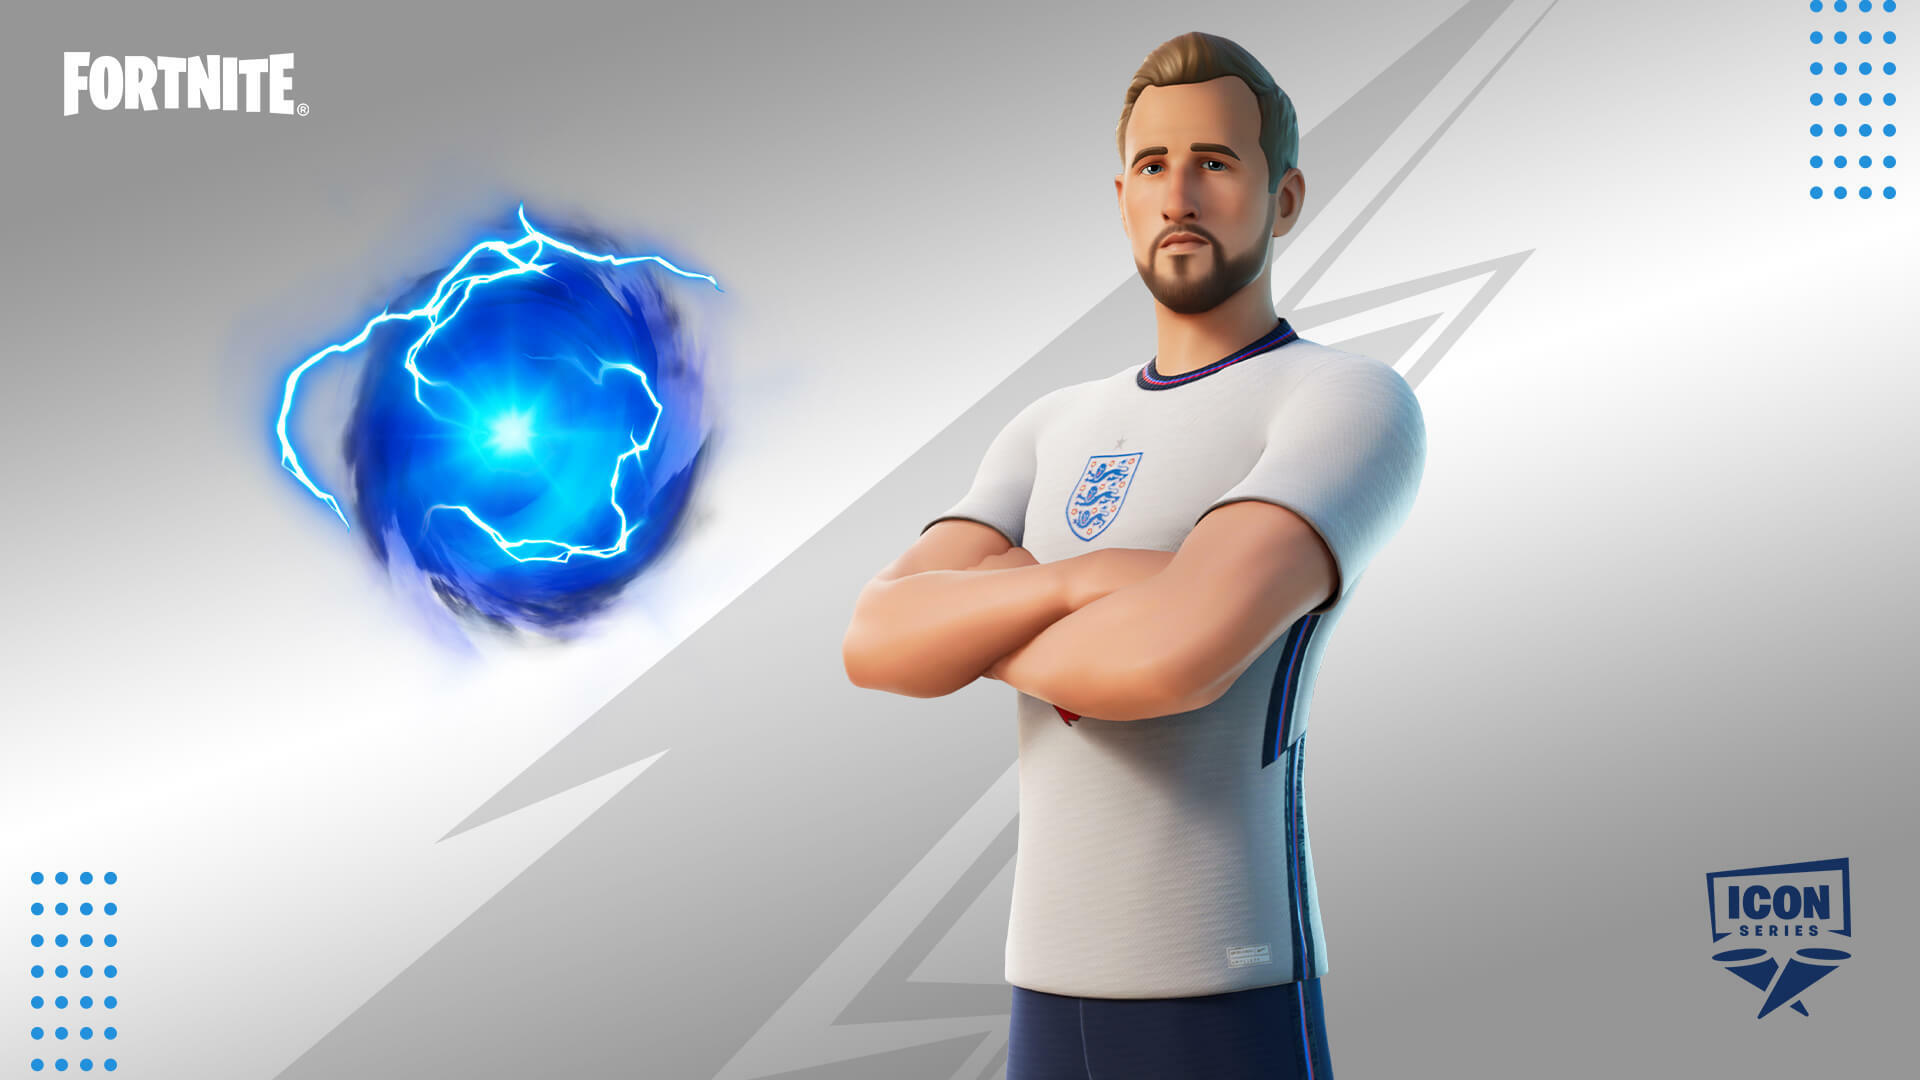 Harry Kane will take to the Fortnite pitch this Friday.